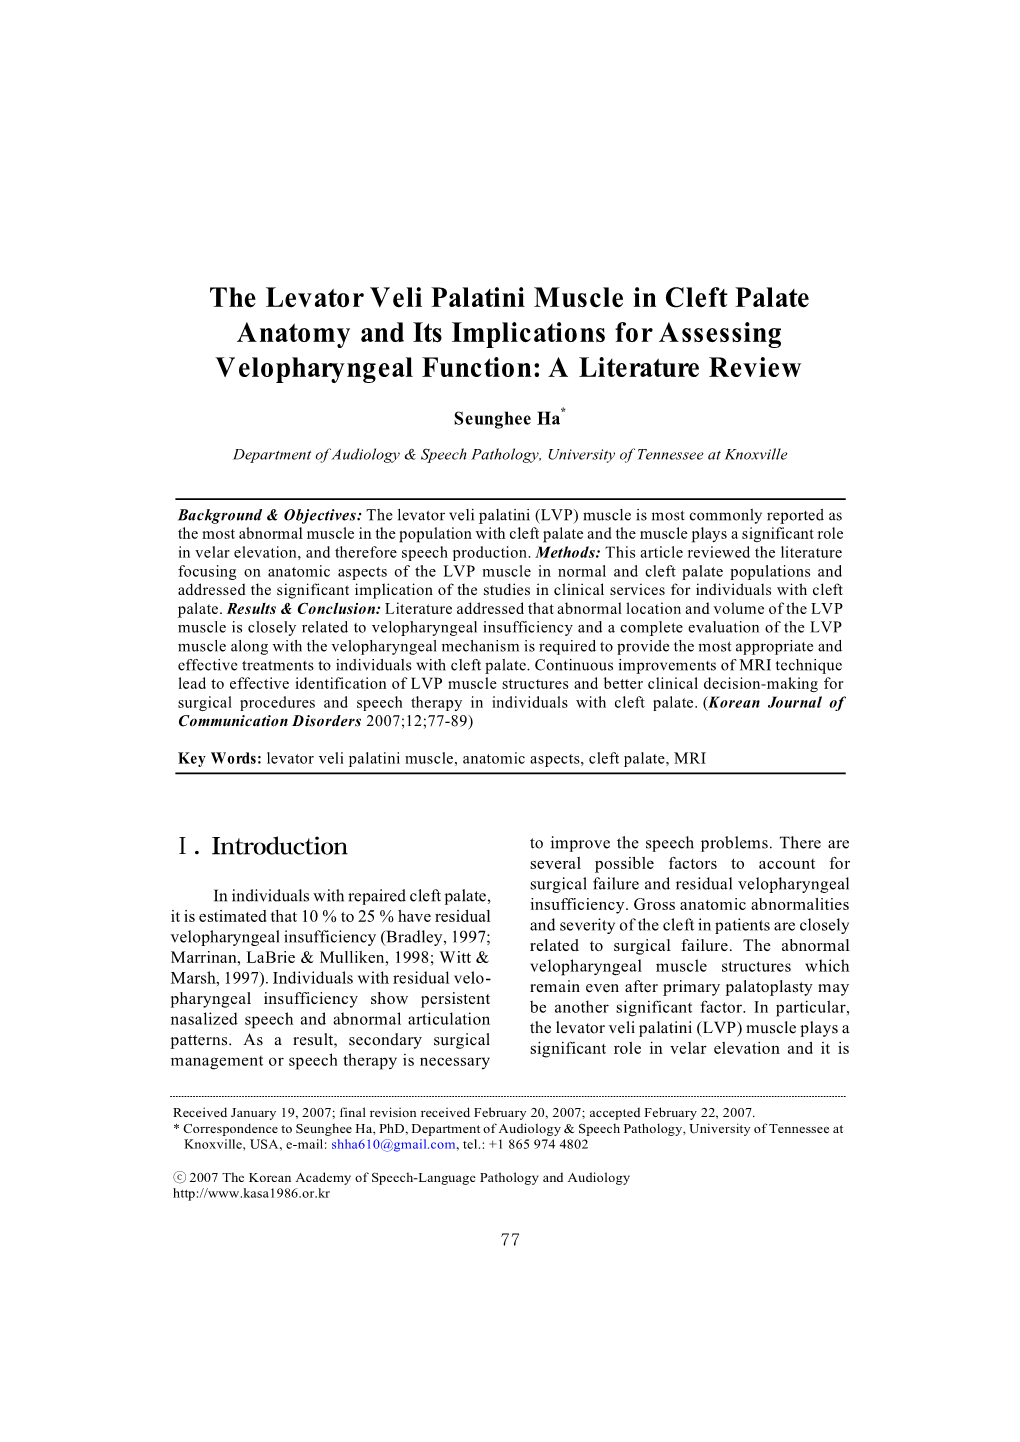 The Levator Veli Palatini Muscle in Cleft Palate Anatomy and Its Implications for Assessing Velopharyngeal Function: a Literature Review